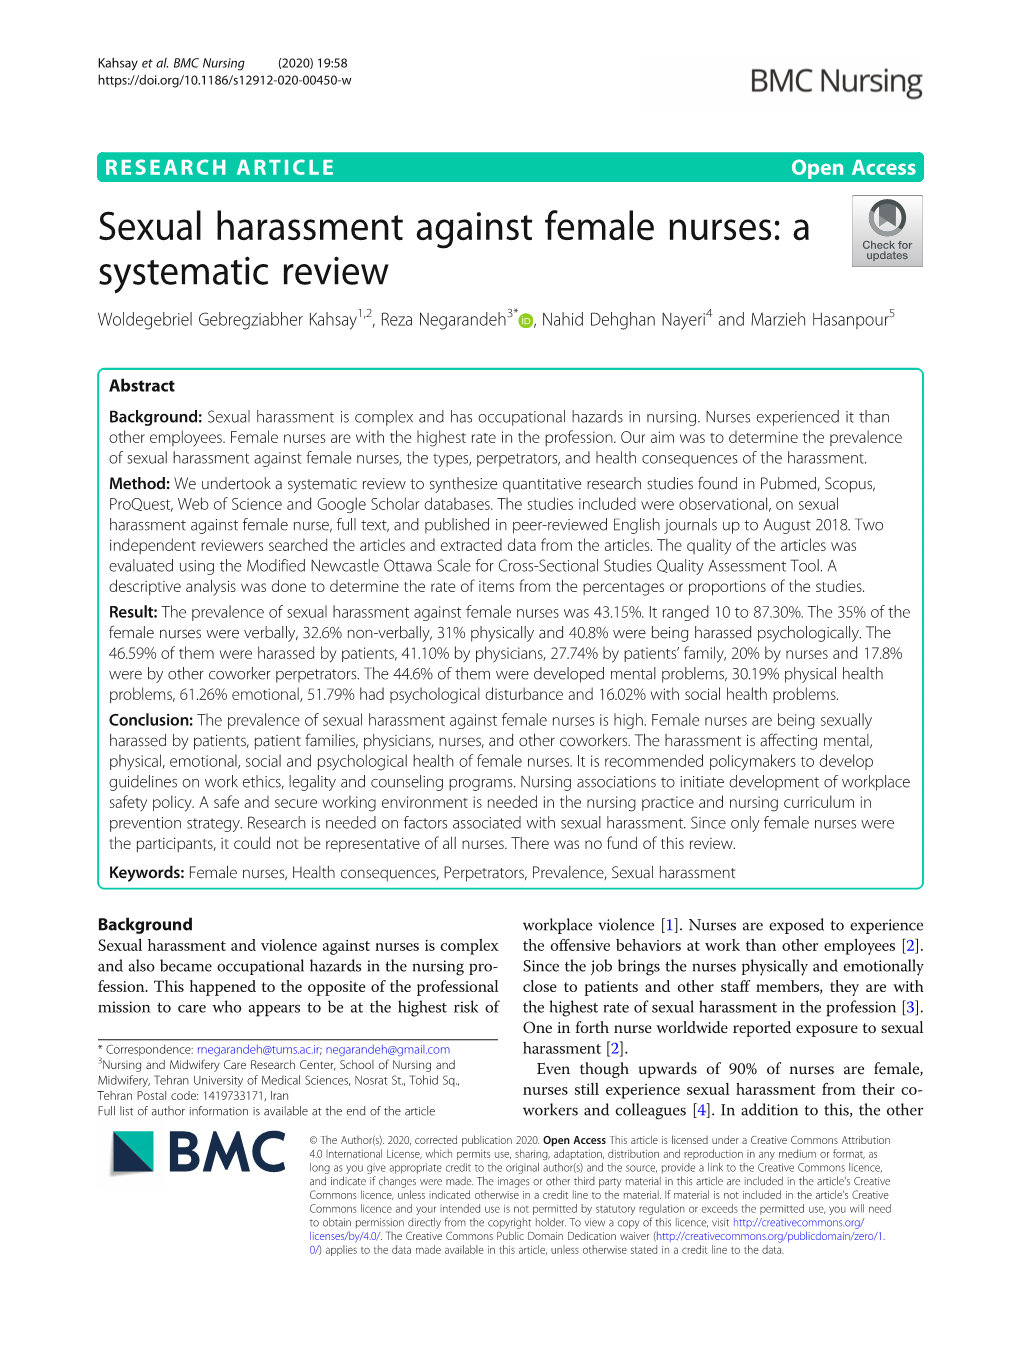 Sexual Harassment Against Female Nurses: a Systematic Review Woldegebriel Gebregziabher Kahsay1,2, Reza Negarandeh3* , Nahid Dehghan Nayeri4 and Marzieh Hasanpour5